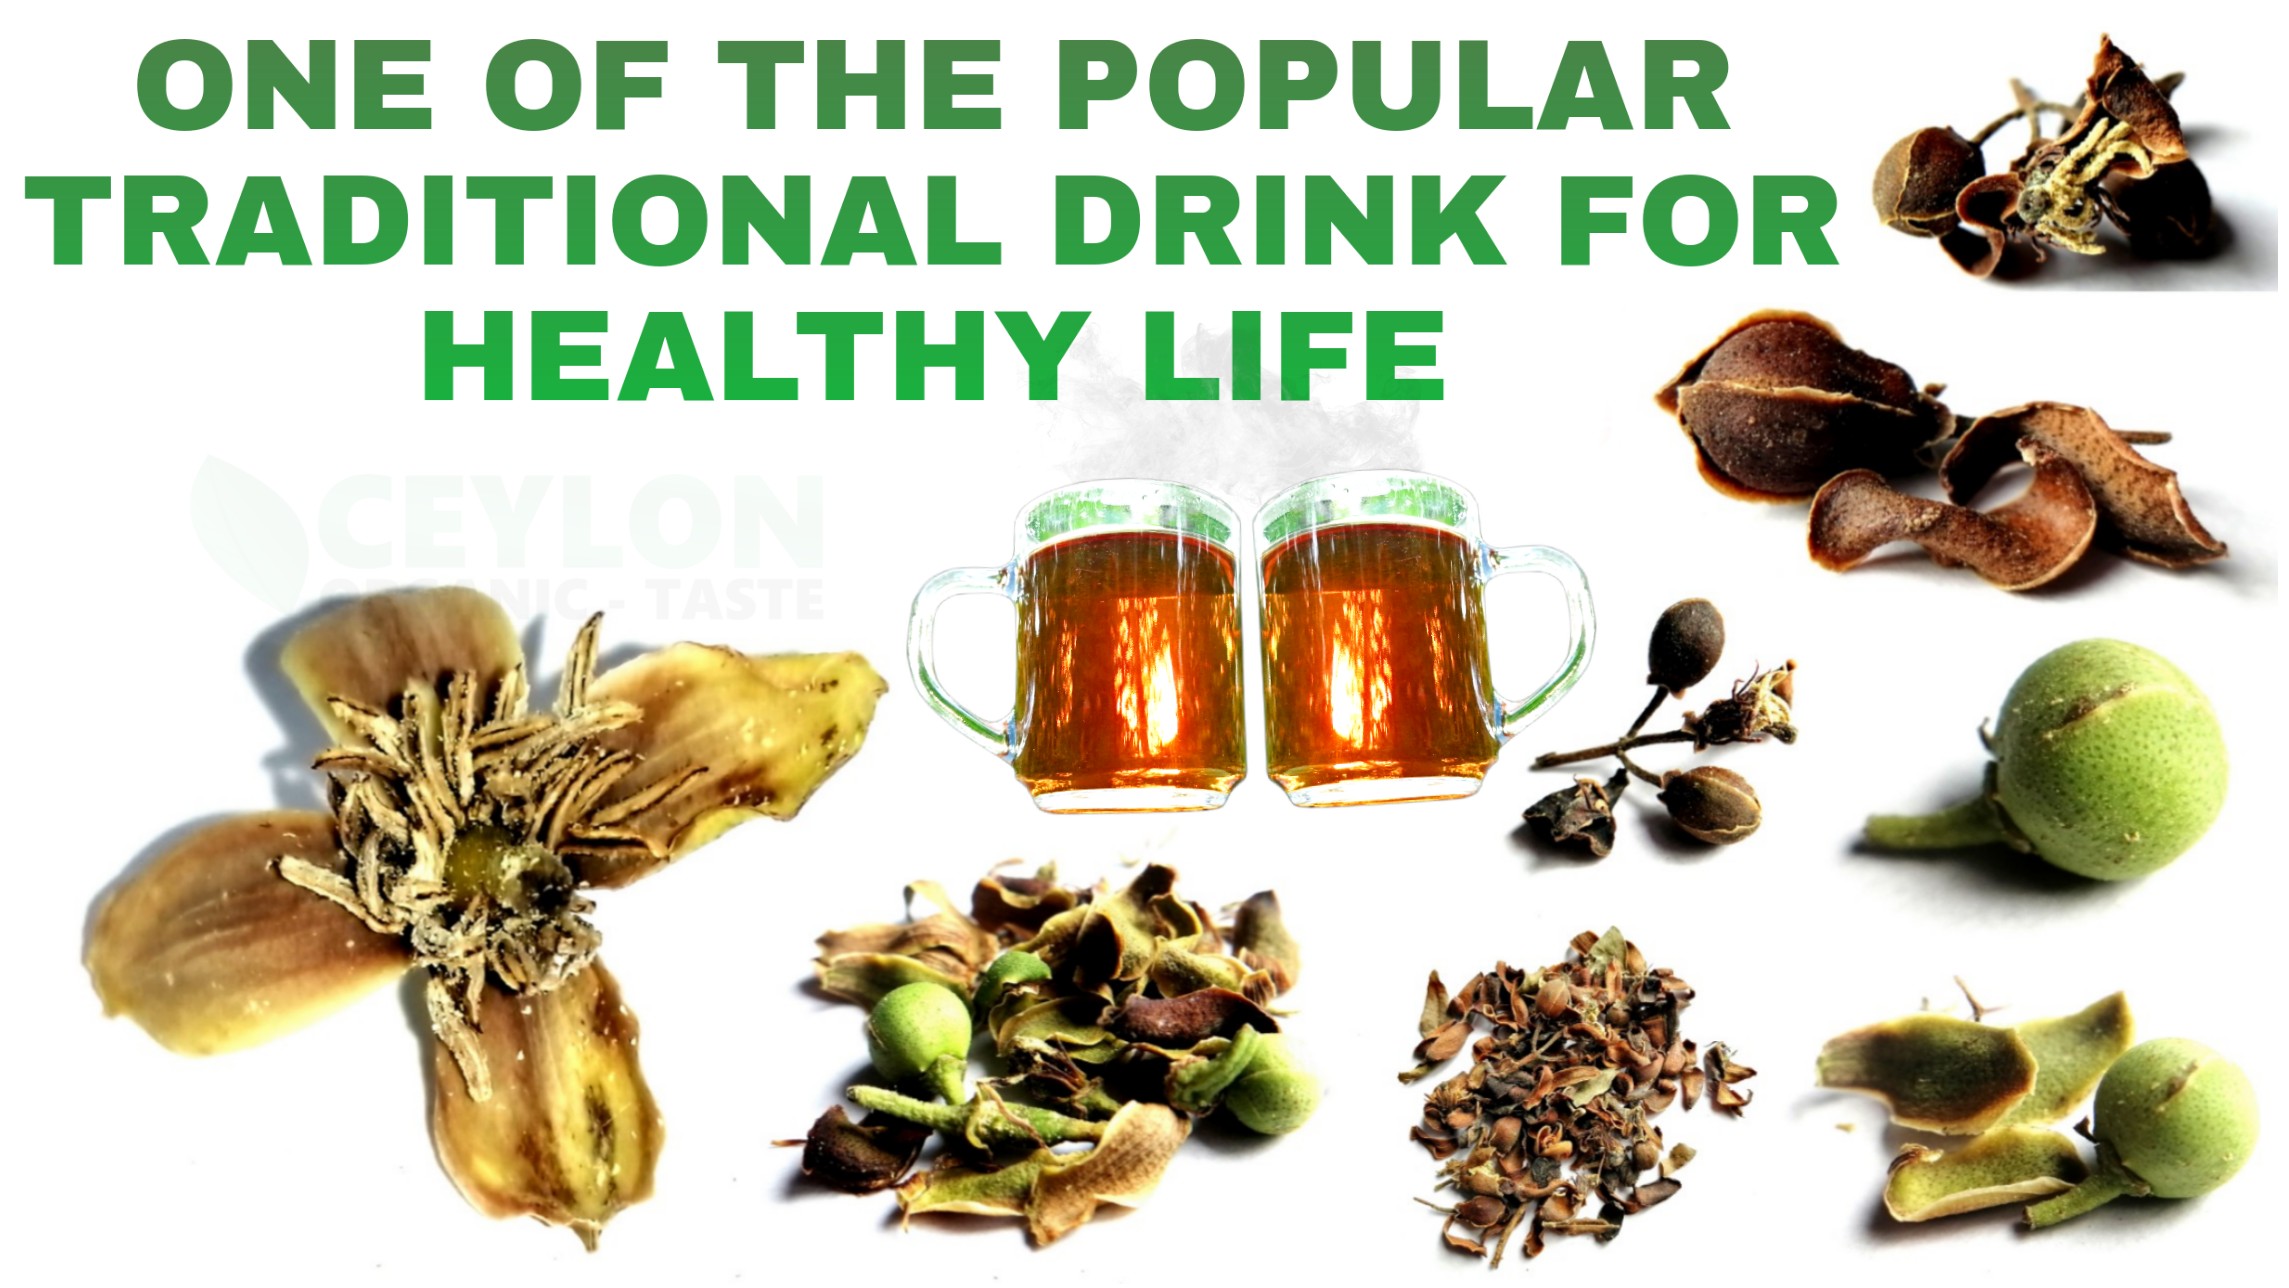 One of the popular traditional drink for healthy life